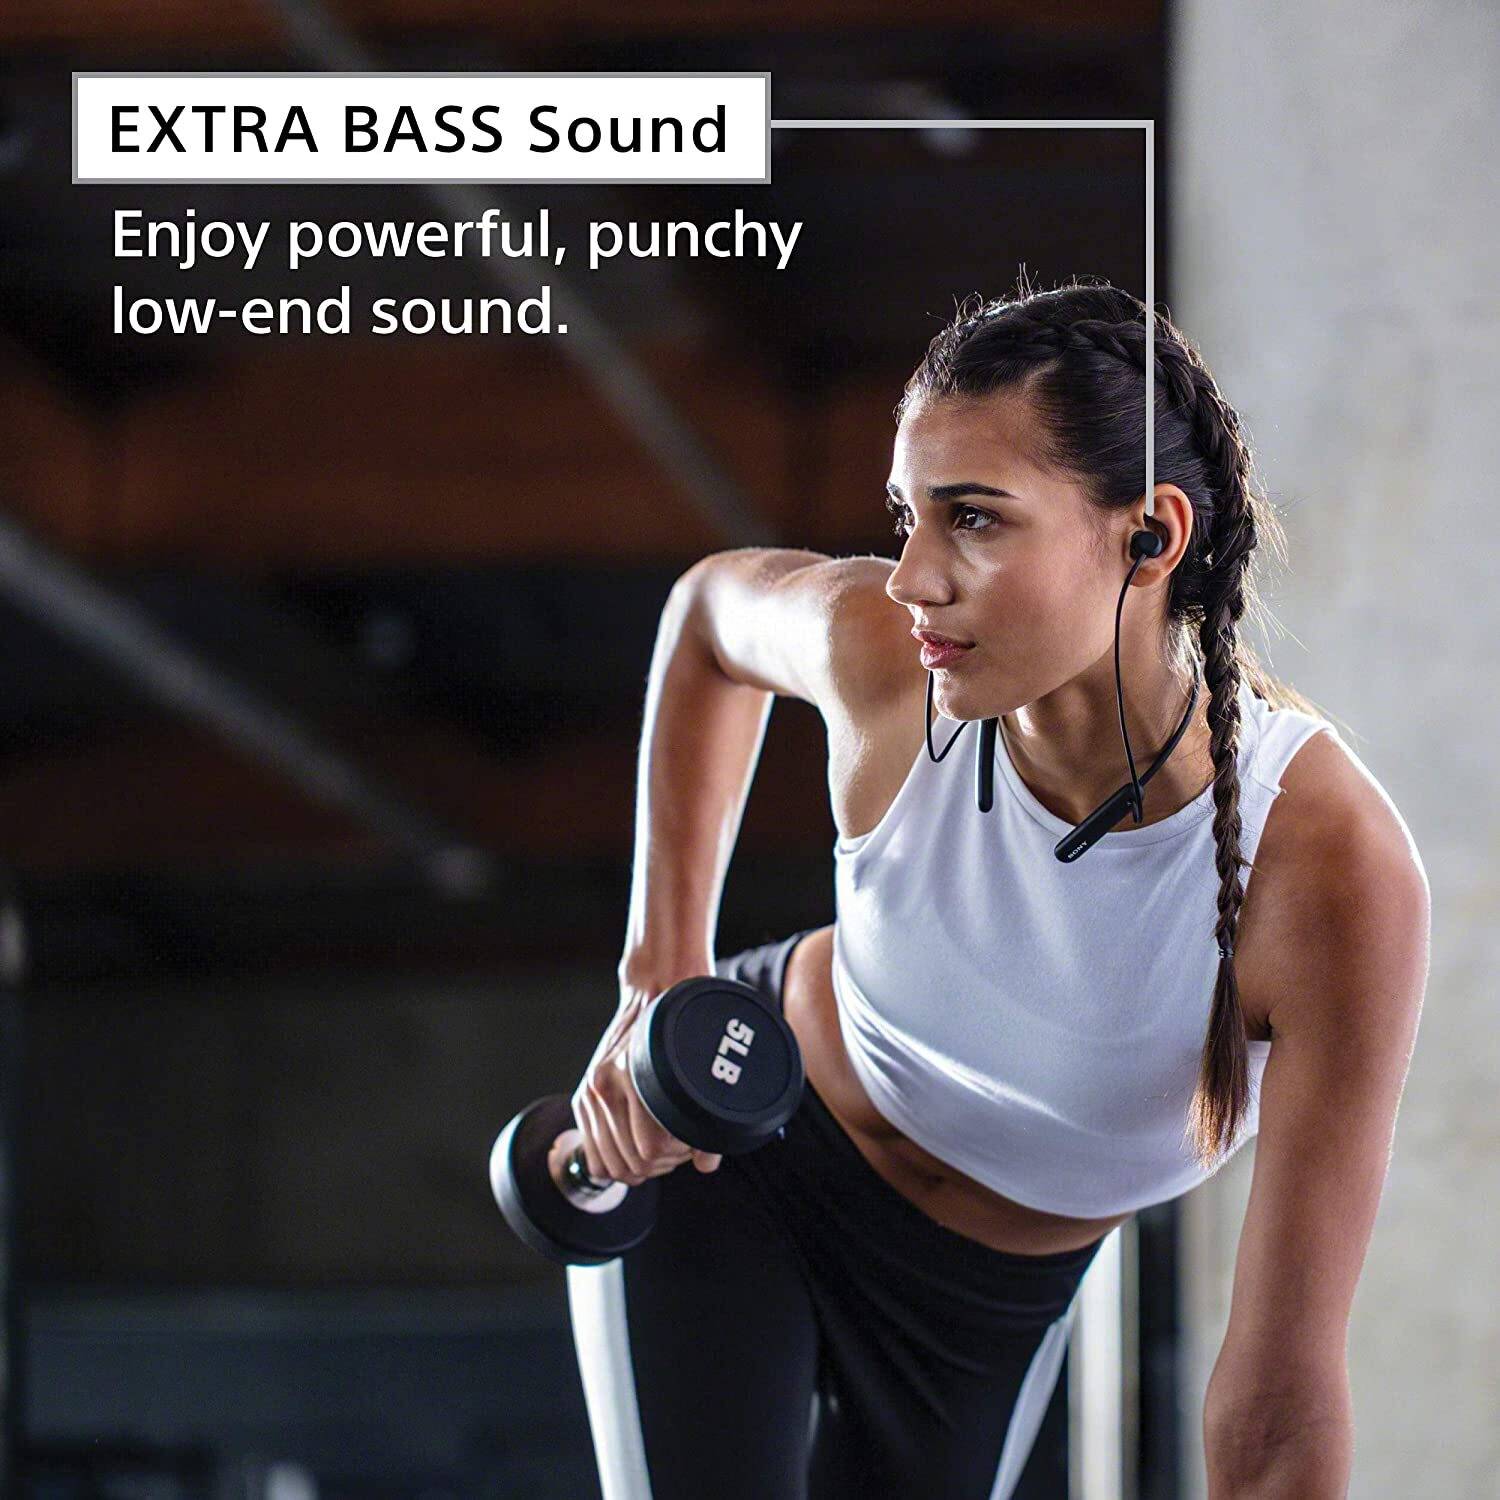 Maximise Your Performance With Extra Bass